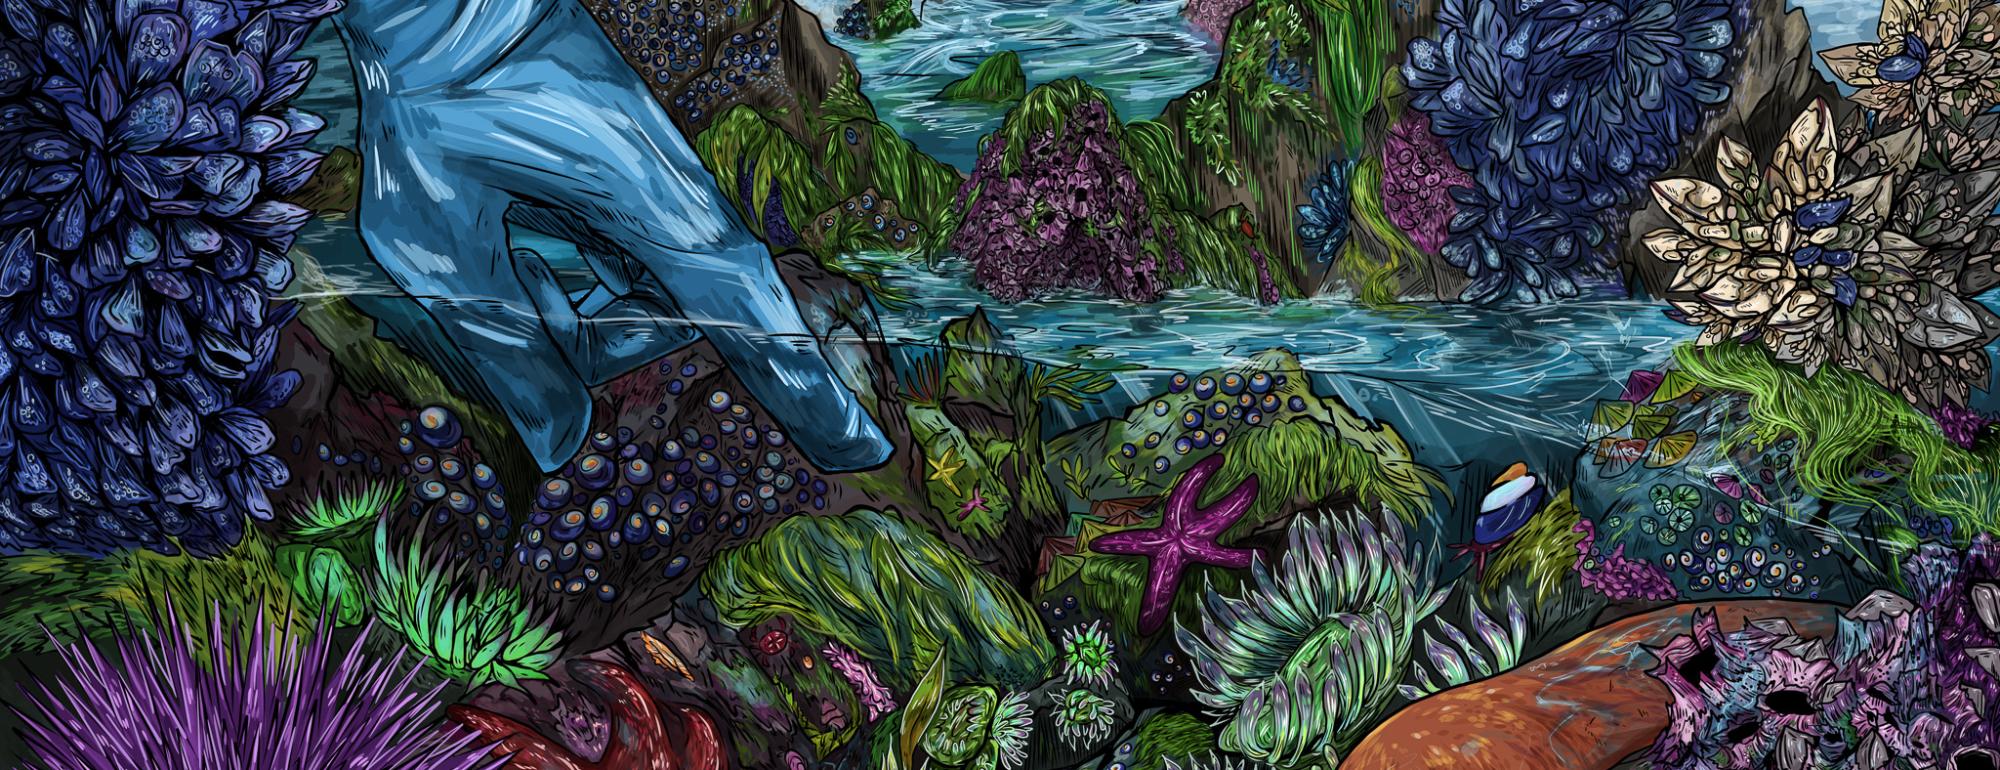 A colorful illustration of a tidepool, with a gloved hand reaching in towards purple urchins, orange sea stars, green anemones, and other creatures.